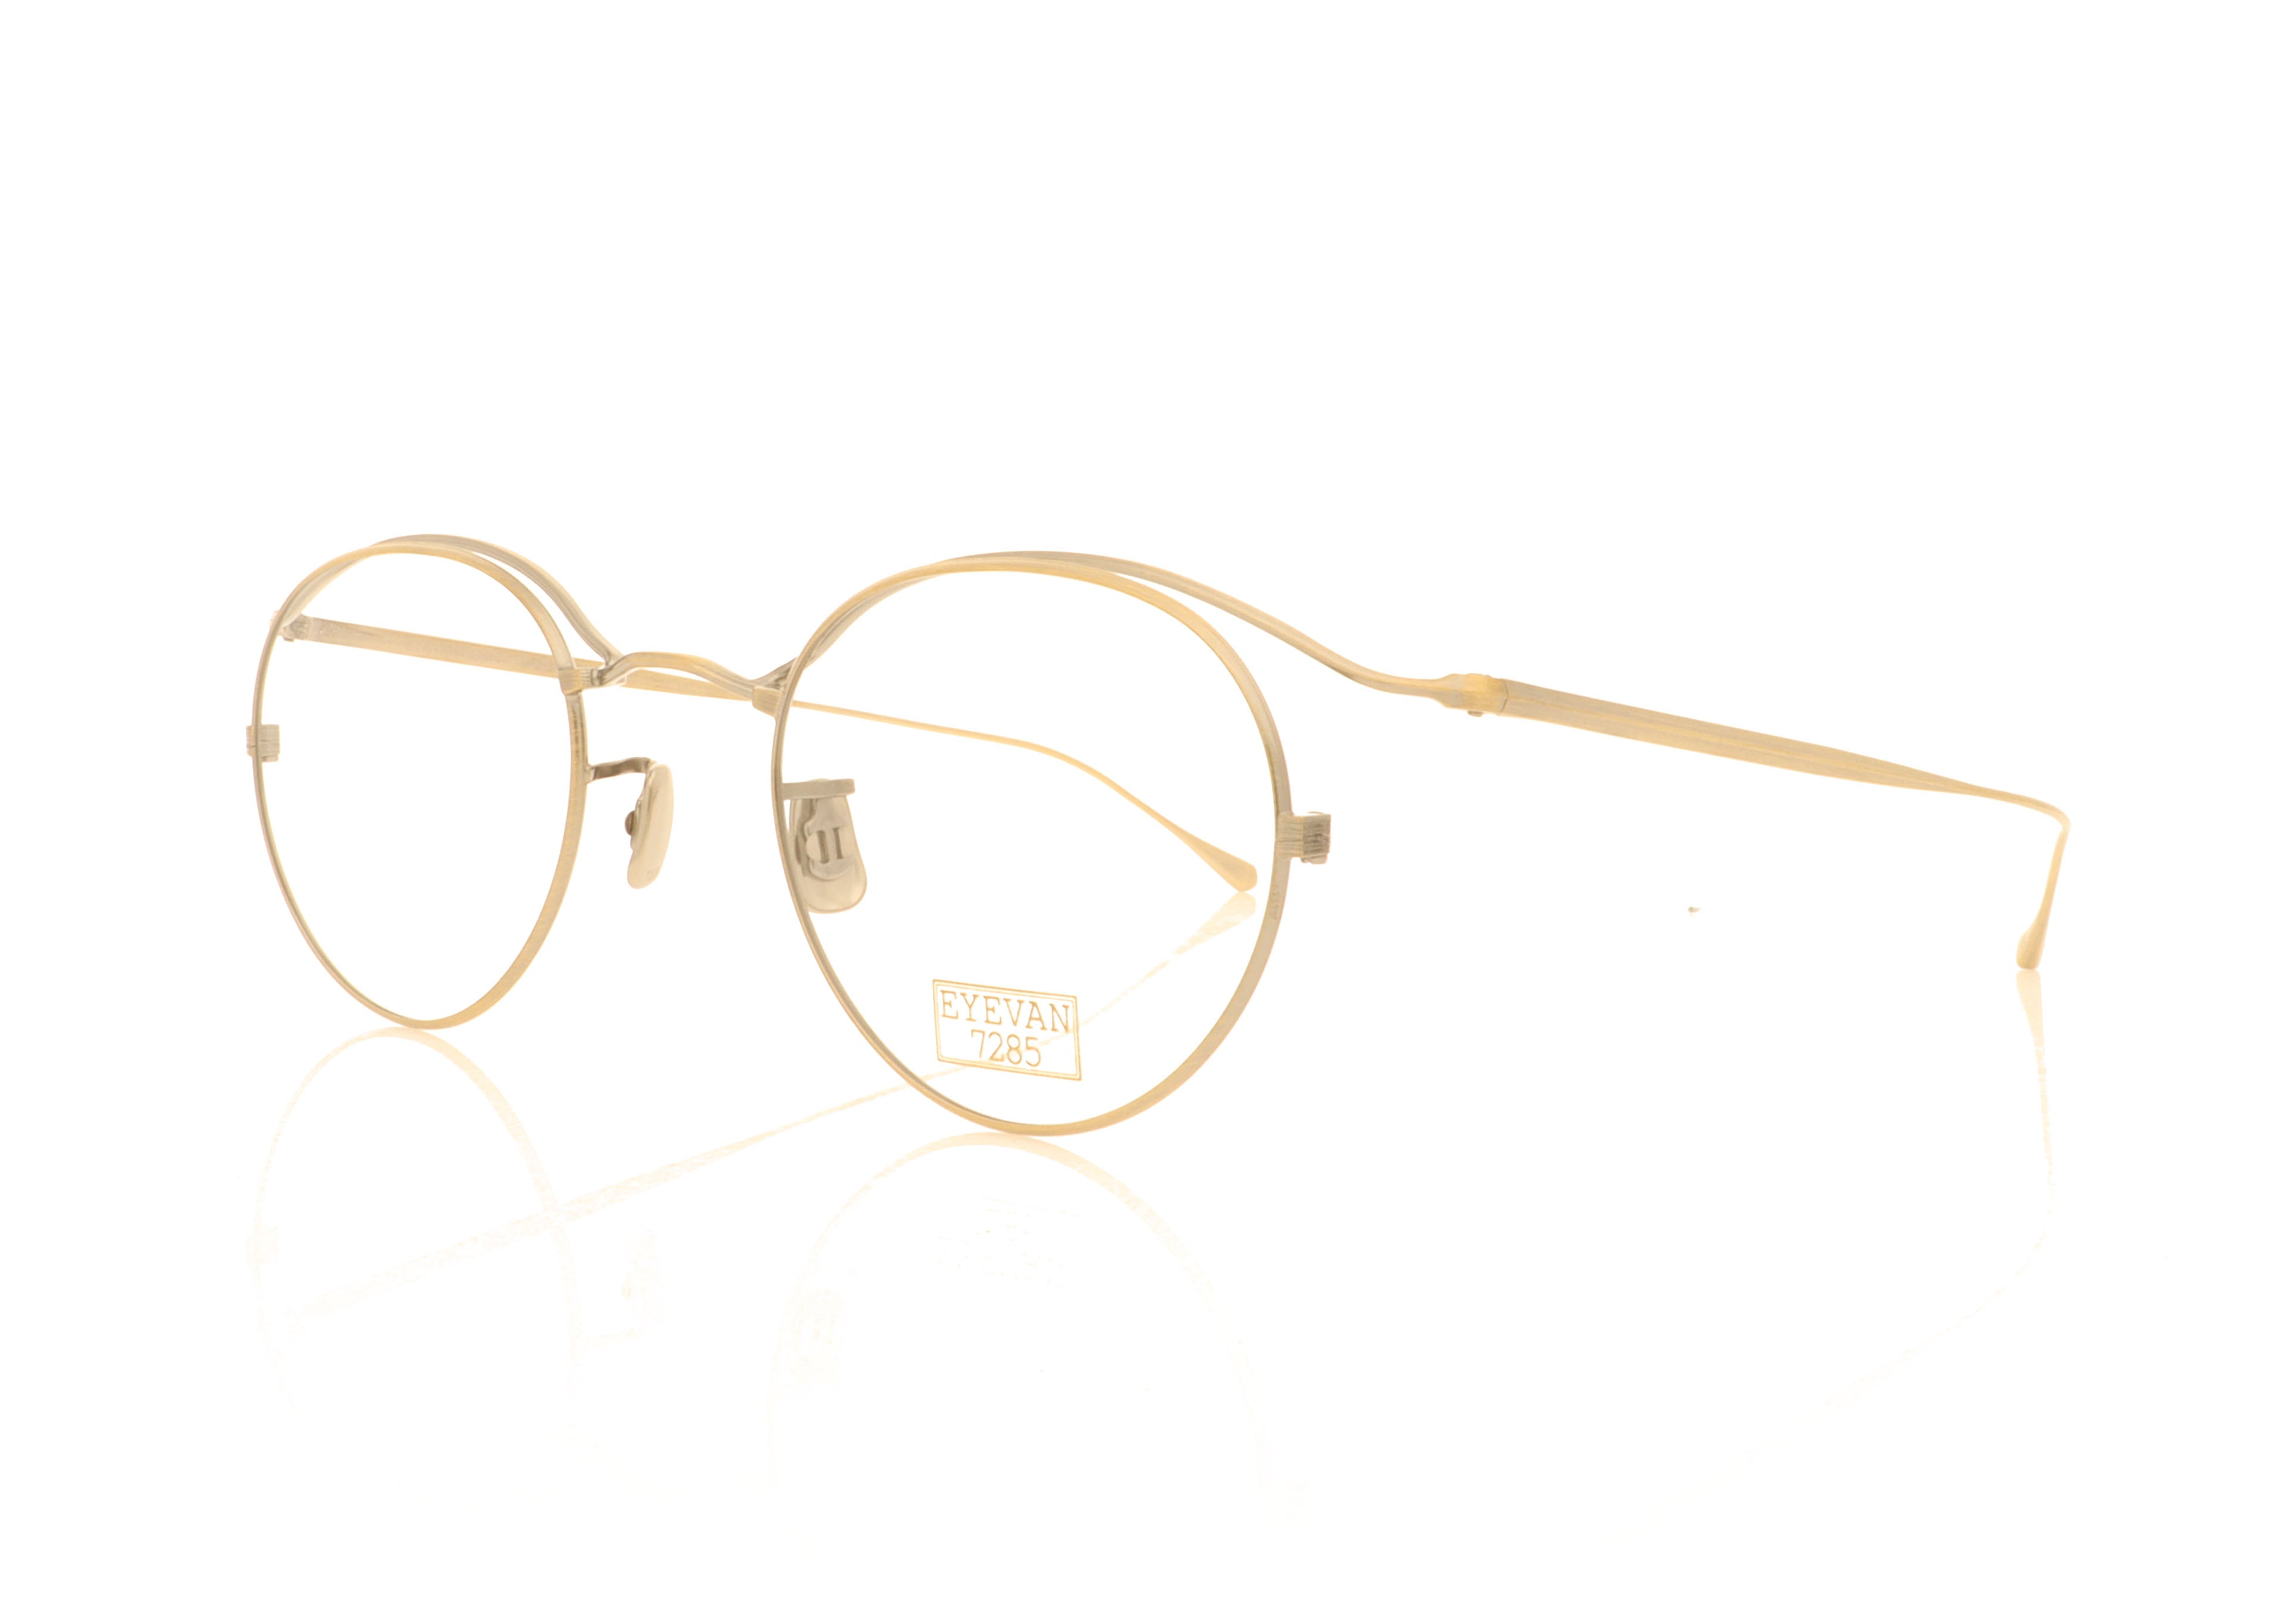 Eyevan 7285 180 901 Gold Silver Glasses | The Eye Place